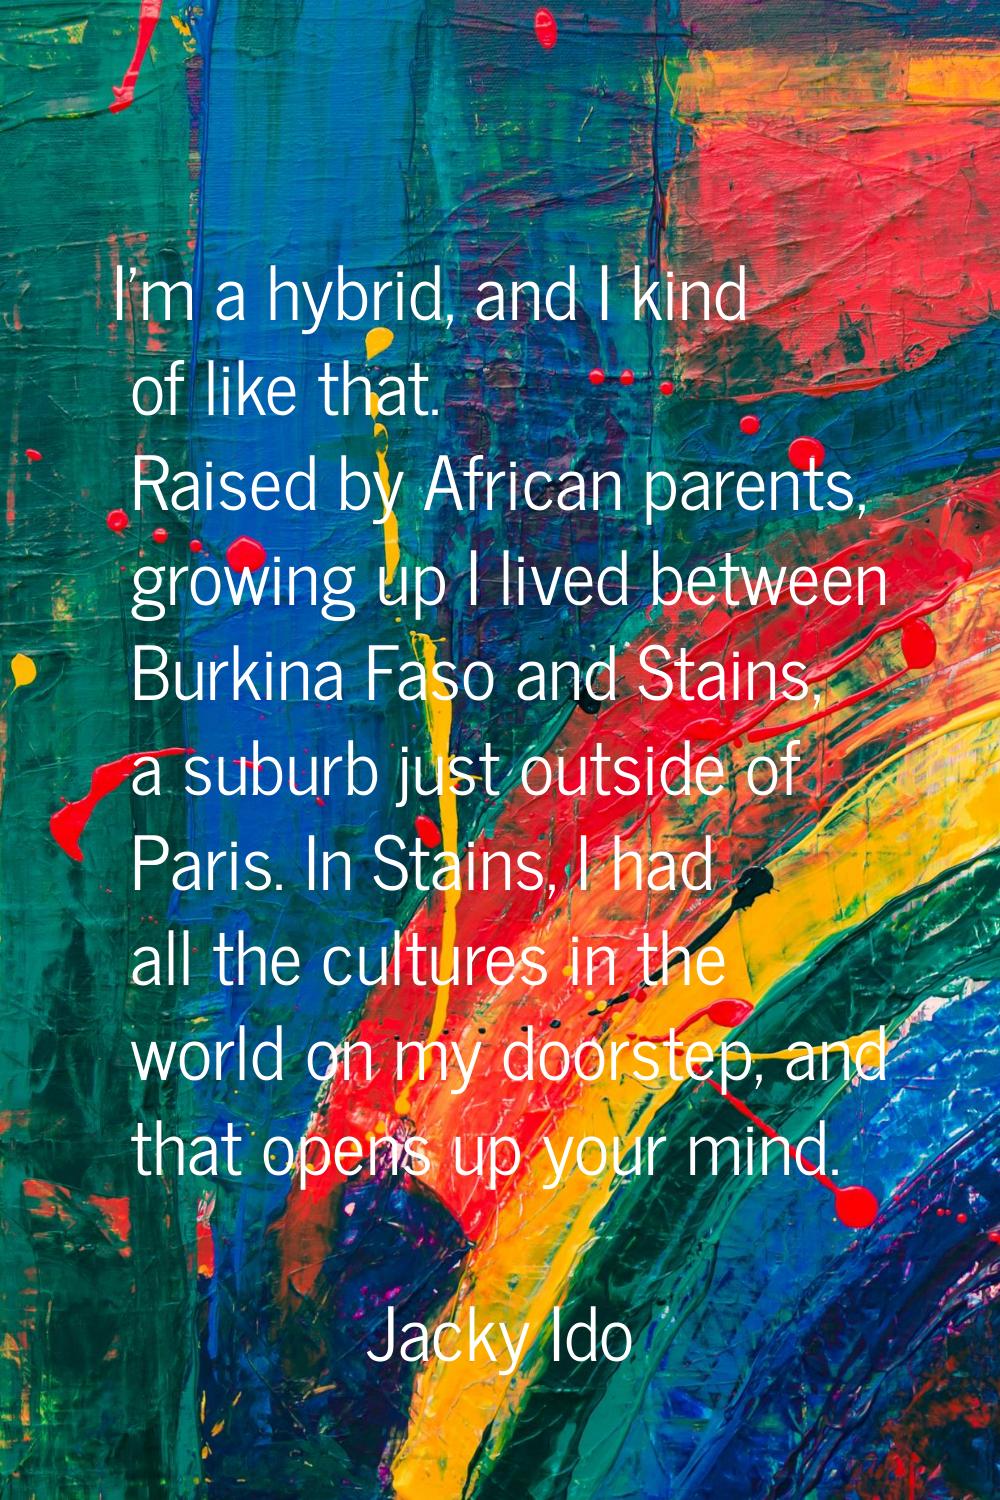 I'm a hybrid, and I kind of like that. Raised by African parents, growing up I lived between Burkin